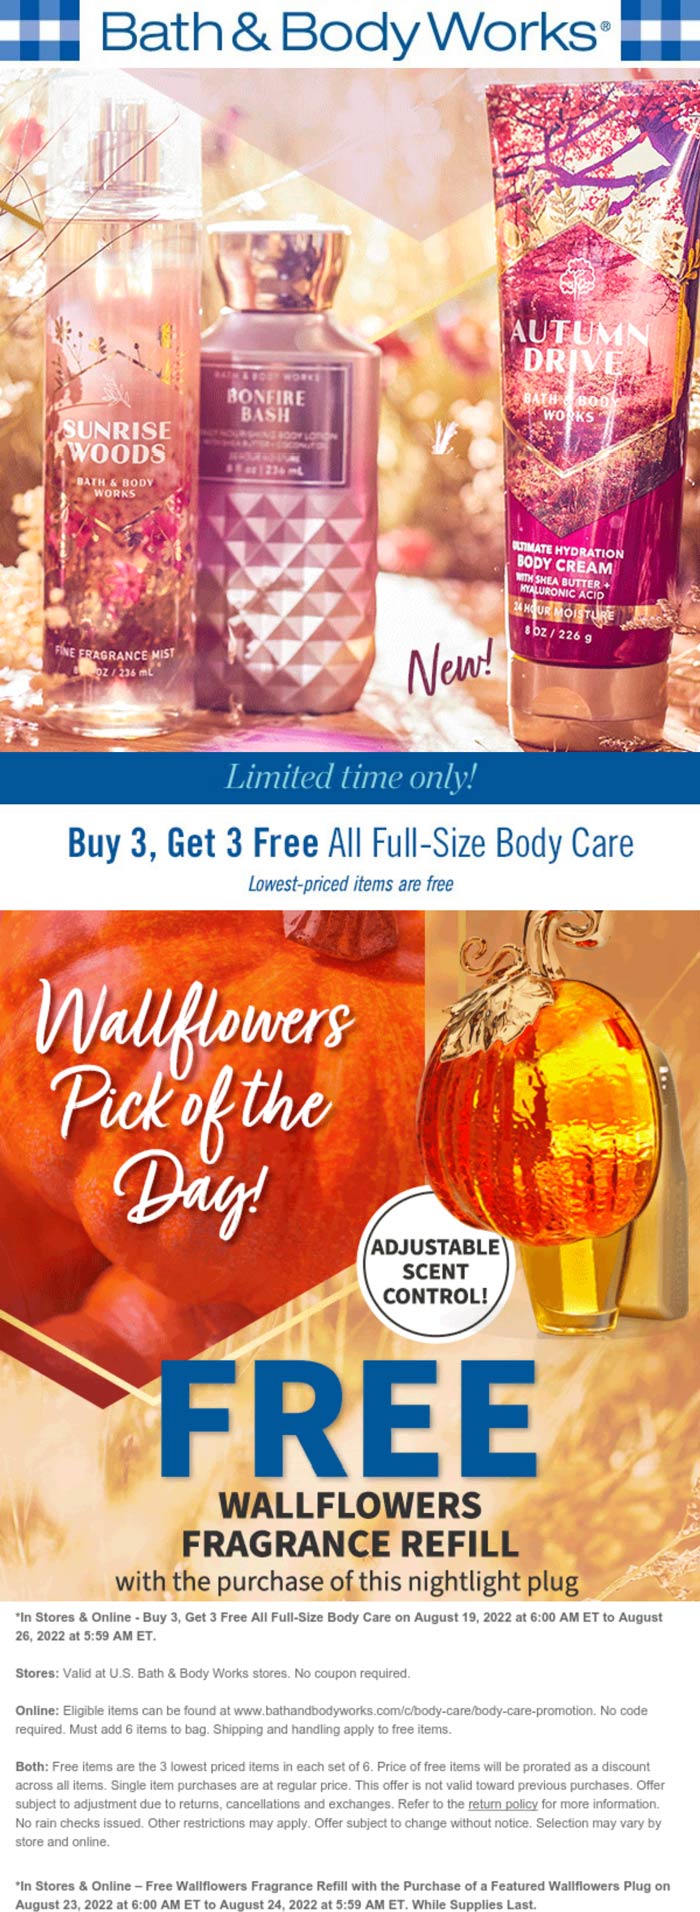 Bath & Body Works stores Coupon  6-for-3 on body care & more at Bath & Body Works, ditto online #bathbodyworks 